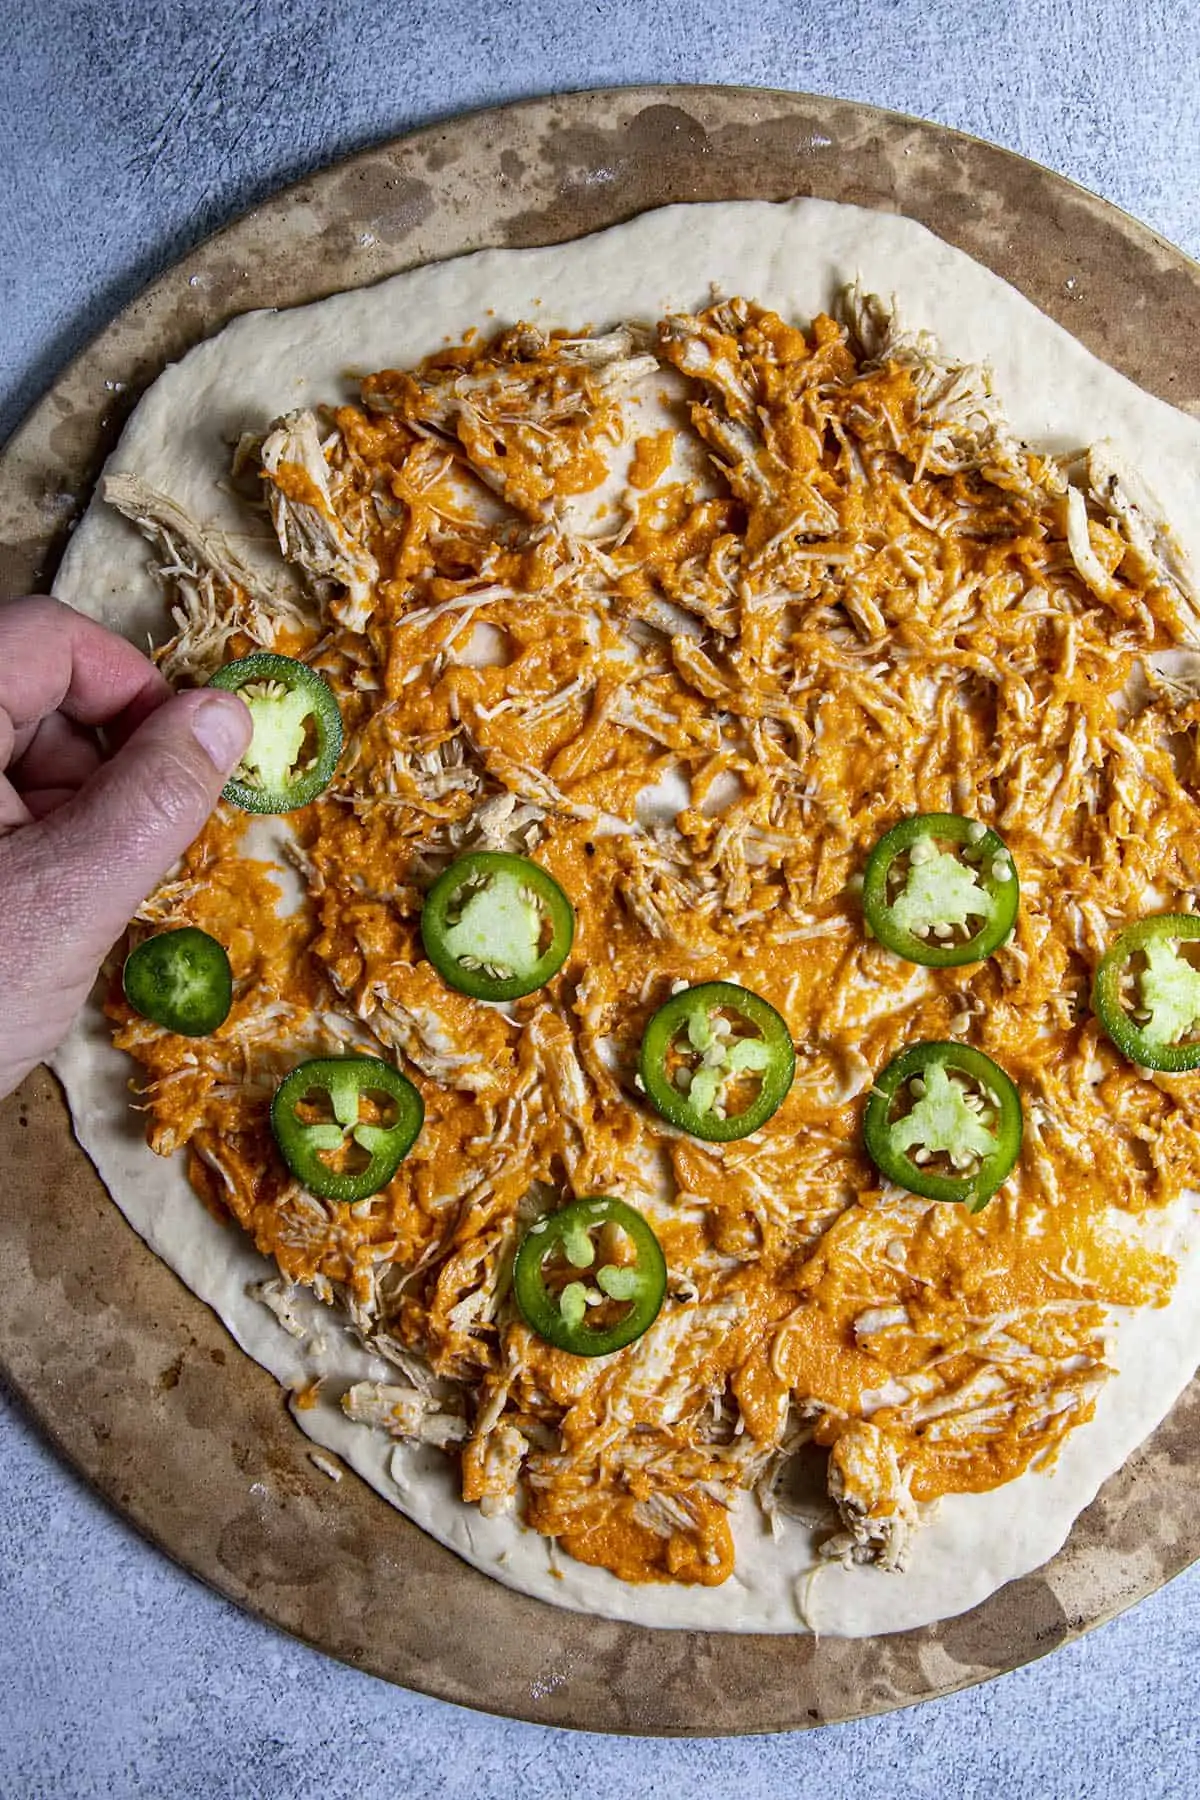 Adding peppers to the Buffalo Chicken Pizza